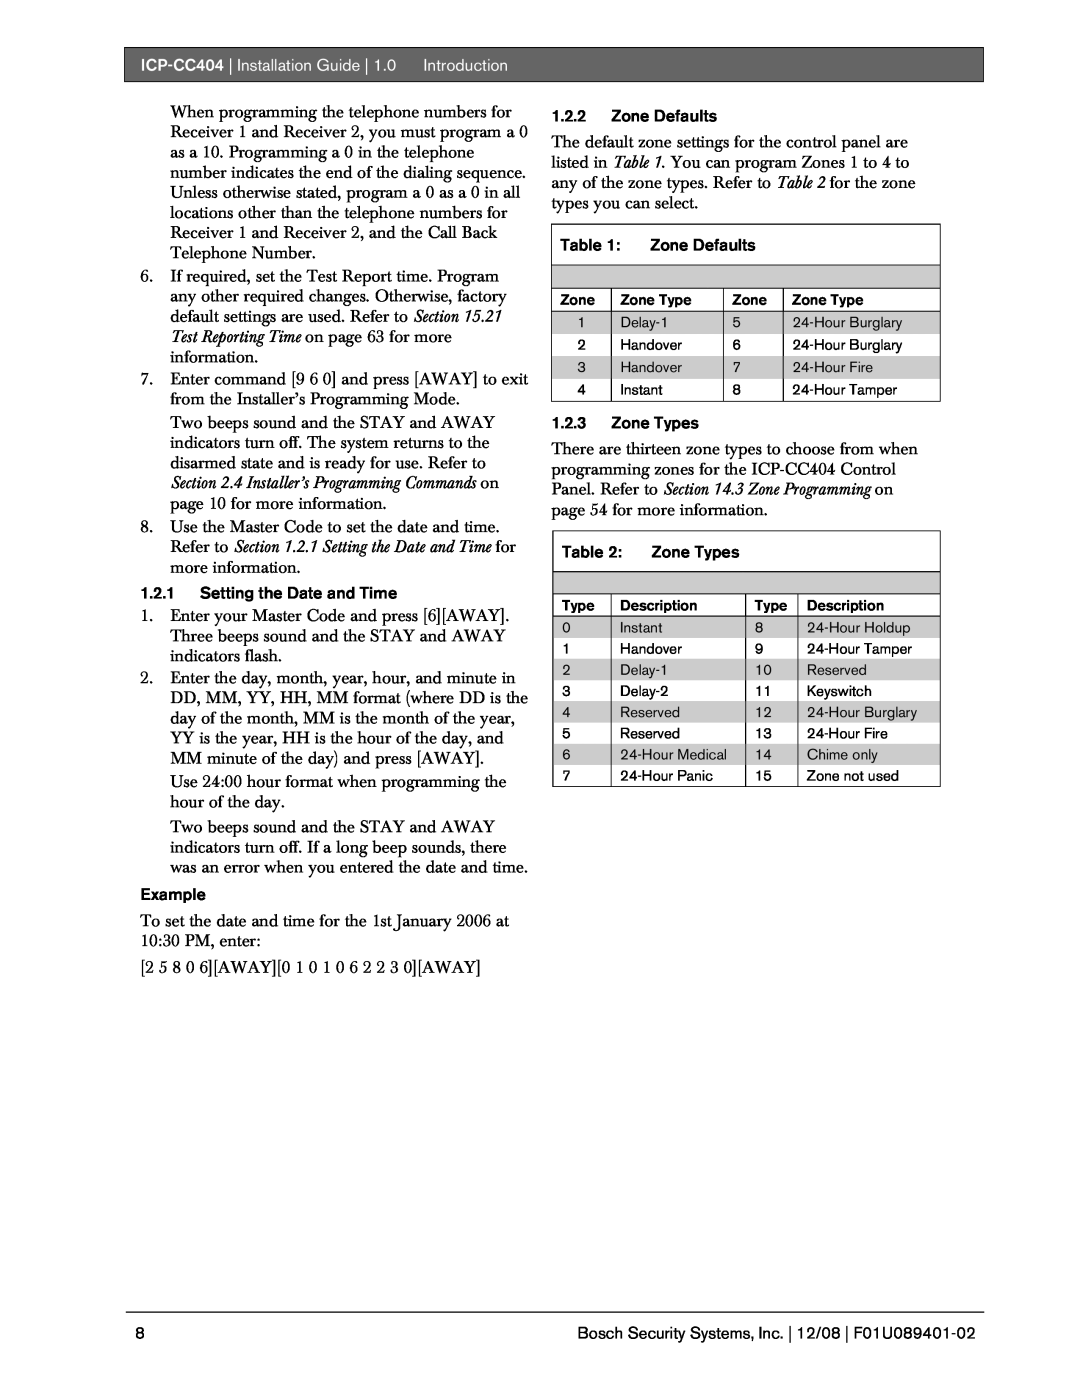 Bosch Appliances ICP-CC404 manual 1.2.1Setting the Date and Time, Example, 1.2.2Zone Defaults, 1.2.3Zone Types, Table 